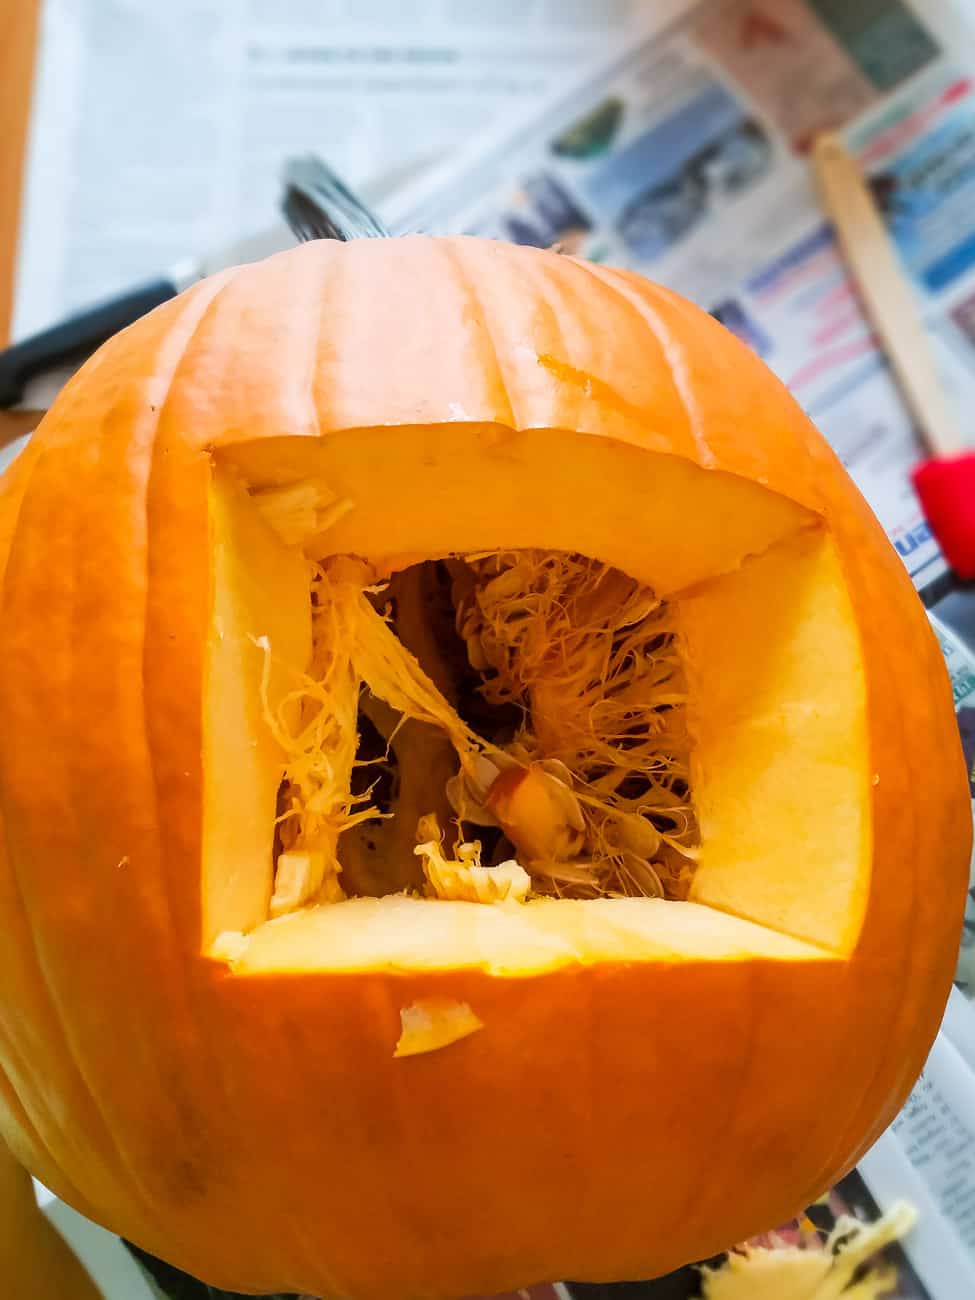 square hole cut in pumpkin back to clean it out